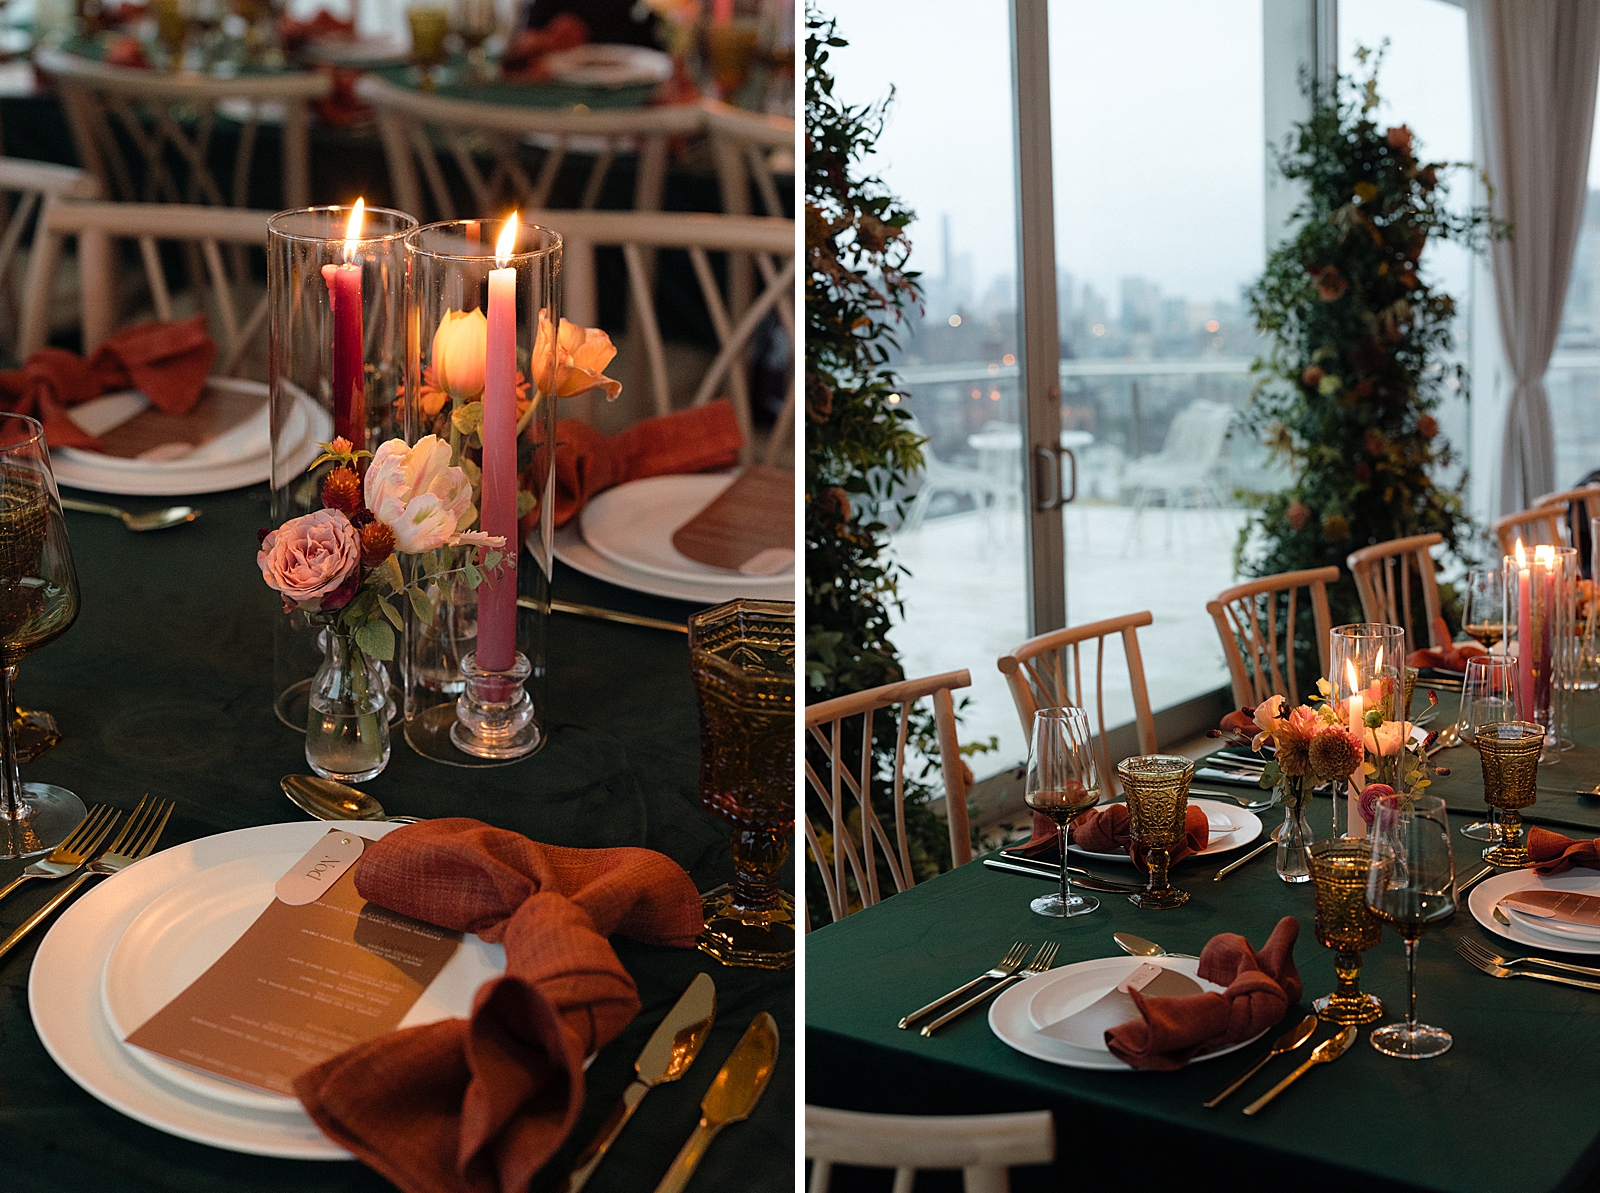 Left photo: Close up shot of a place setting on a reception table. 
Right photo: Close up shot of two place settings on a reception table. 